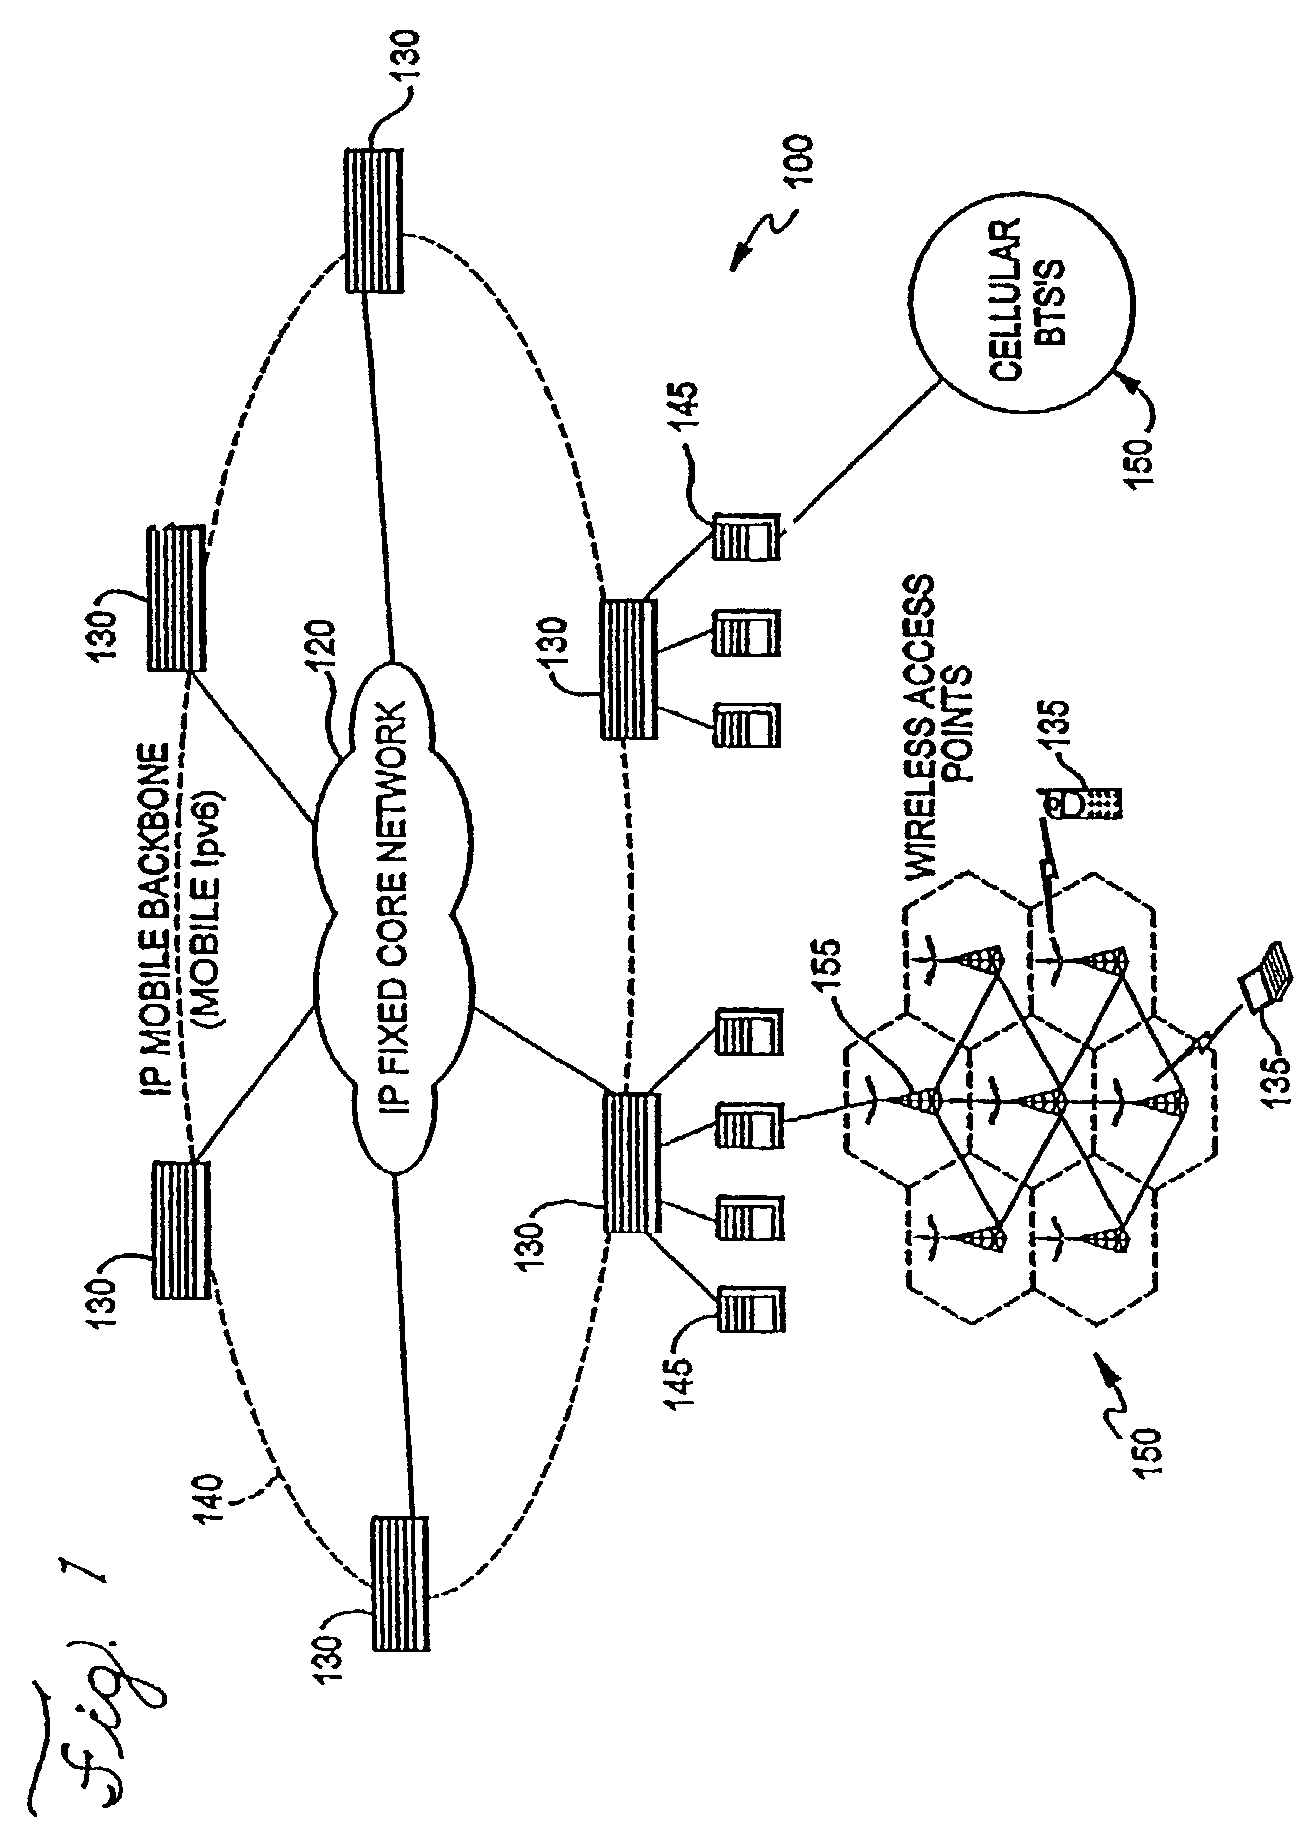 Secure network access method